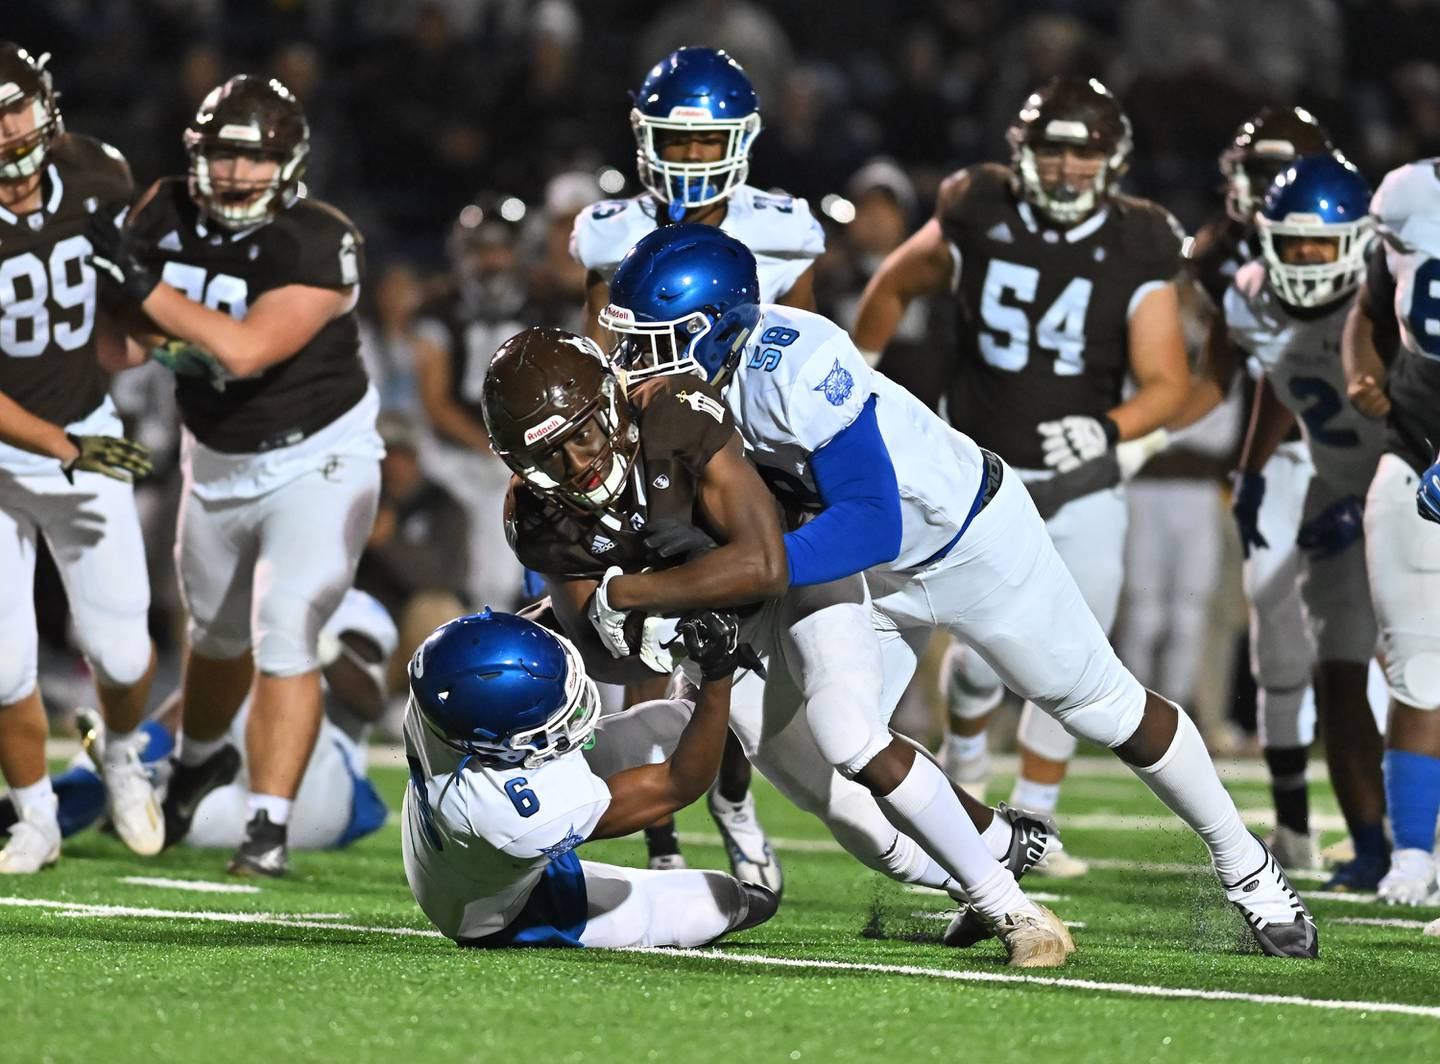 Joliet Catholic's Justin Bonsu (11) runs the ball during IHSA Class 4A first round playoff on Friday, Oct. 28, 2022, at Joliet. (Dean Reid for Shaw Media)